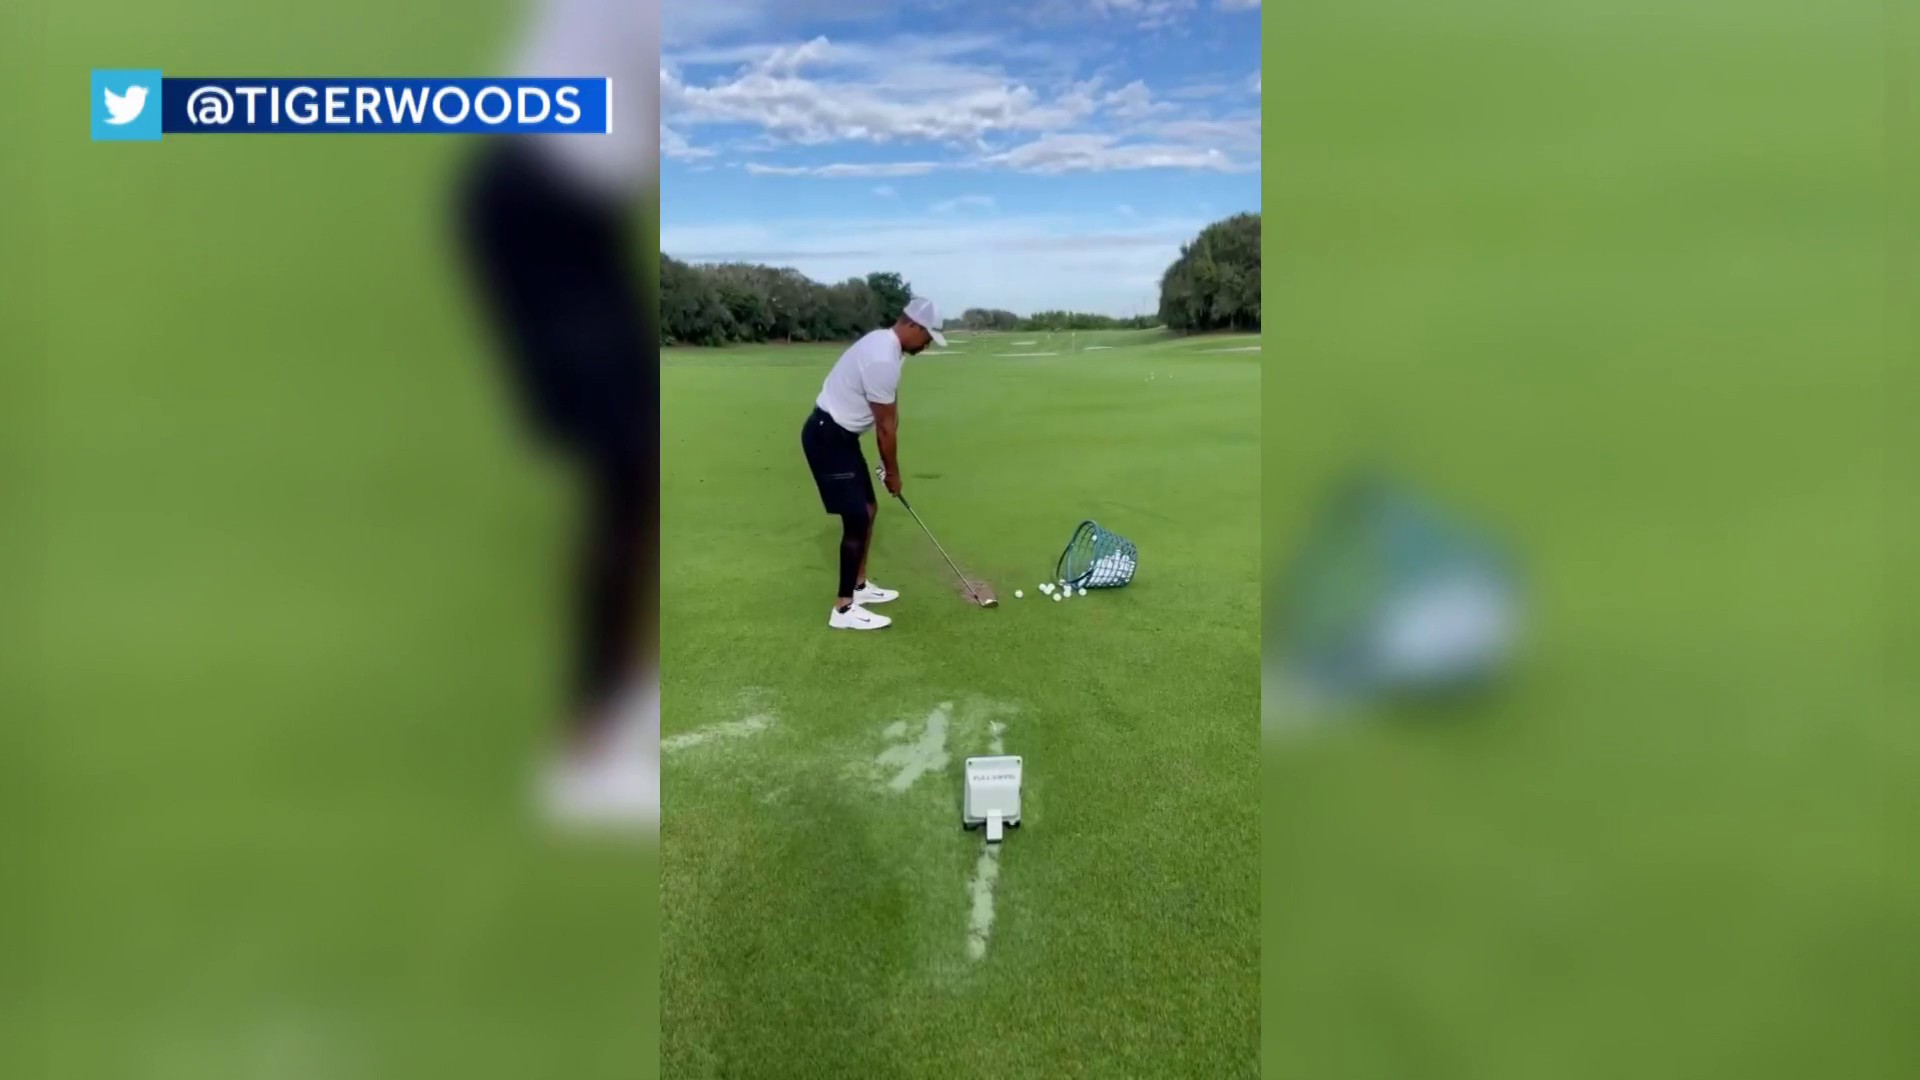 Tiger Woods seen playing golf for first time since car accident